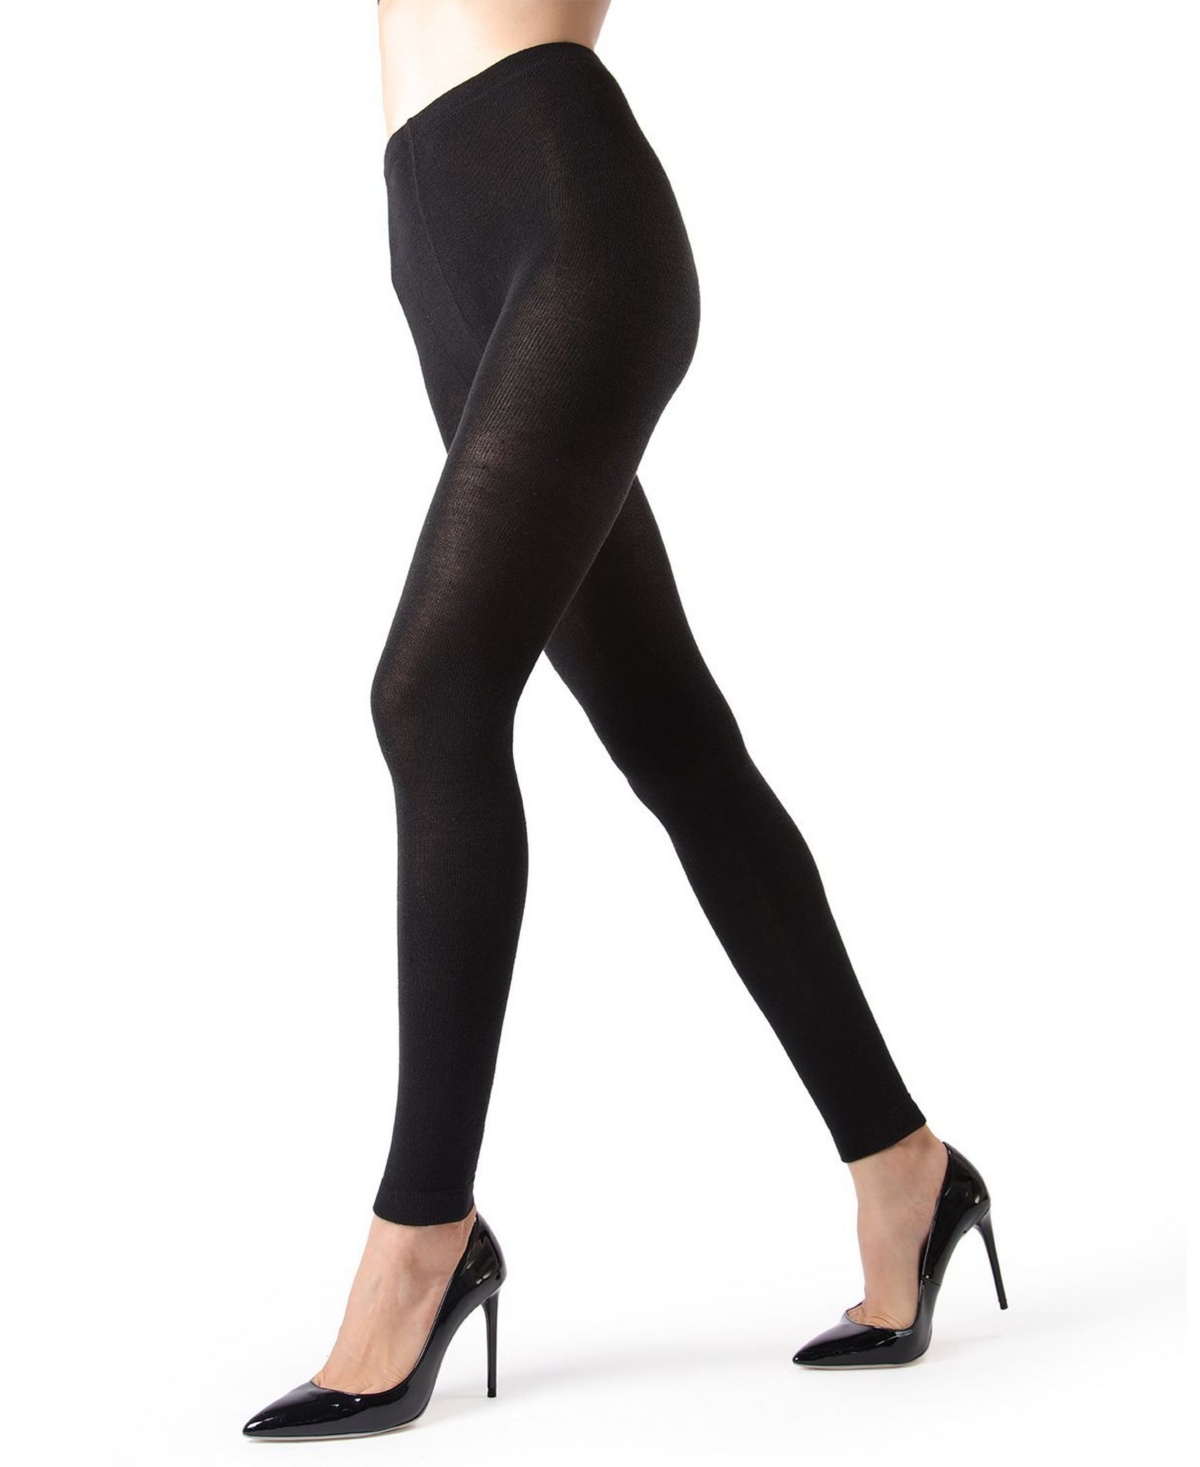 Women's Cashmere Blend Footless Tights - Black